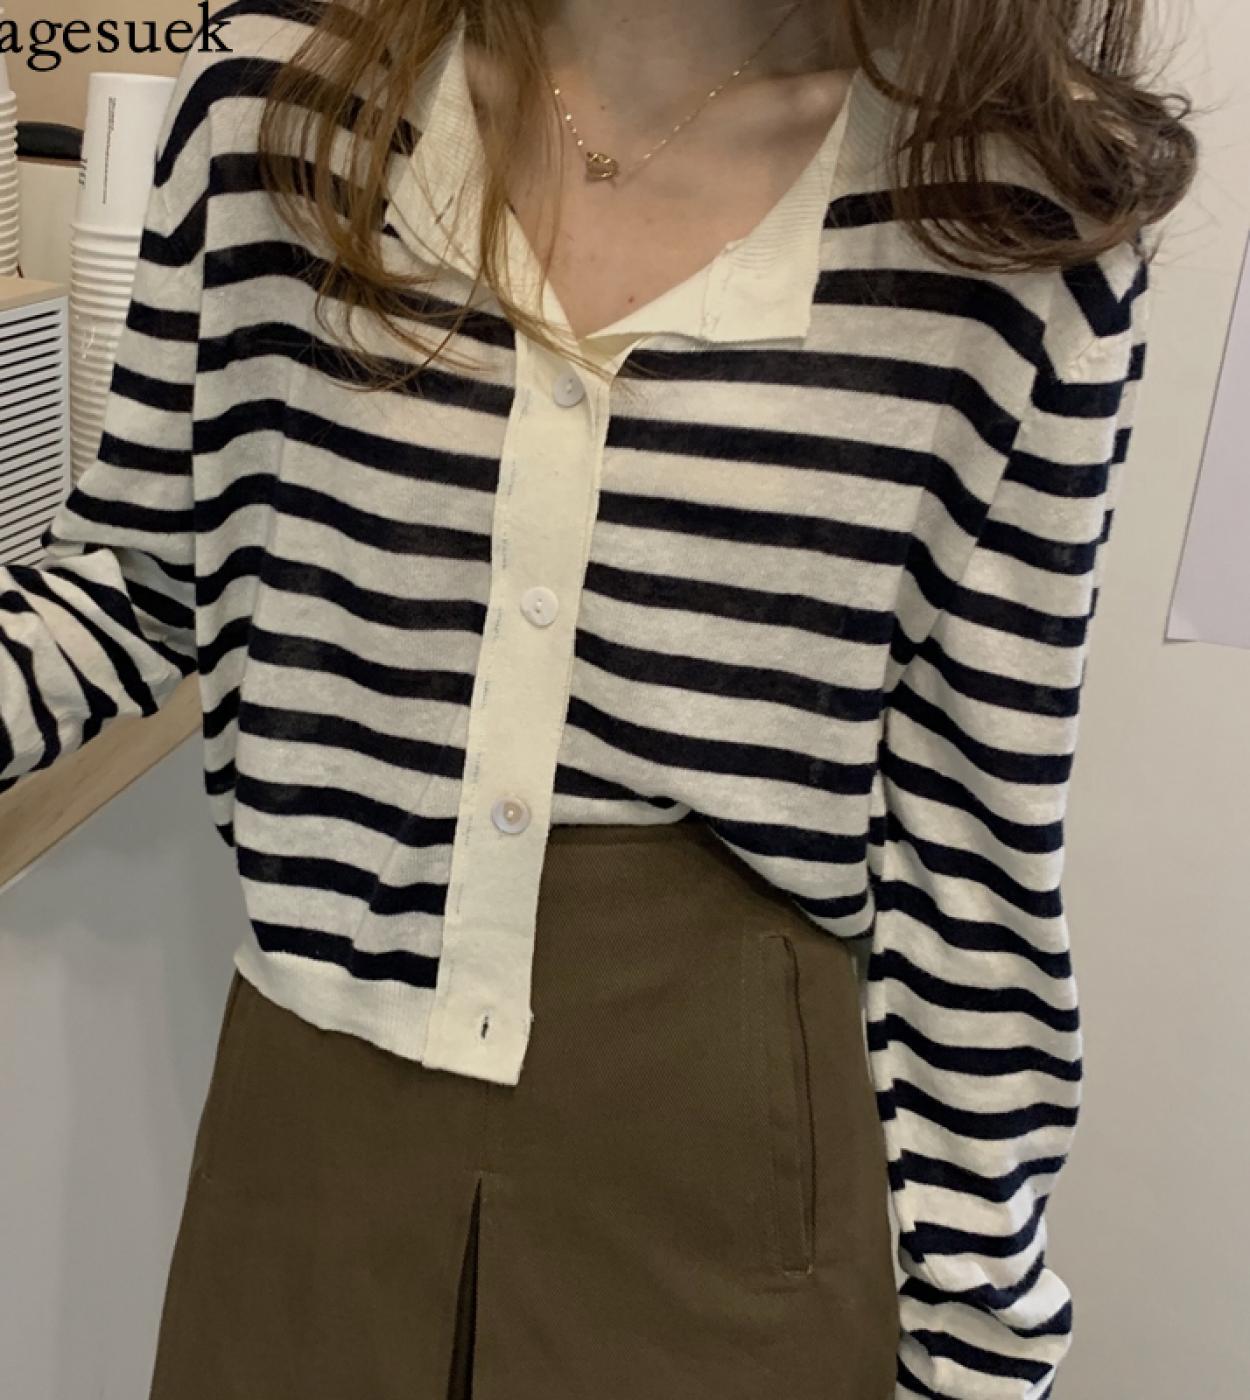 Loose Thin O Neck Short Coat Spring New  Knitted Wild Blouse Women College Style Striped Cardigan Thin Tops Female 12896